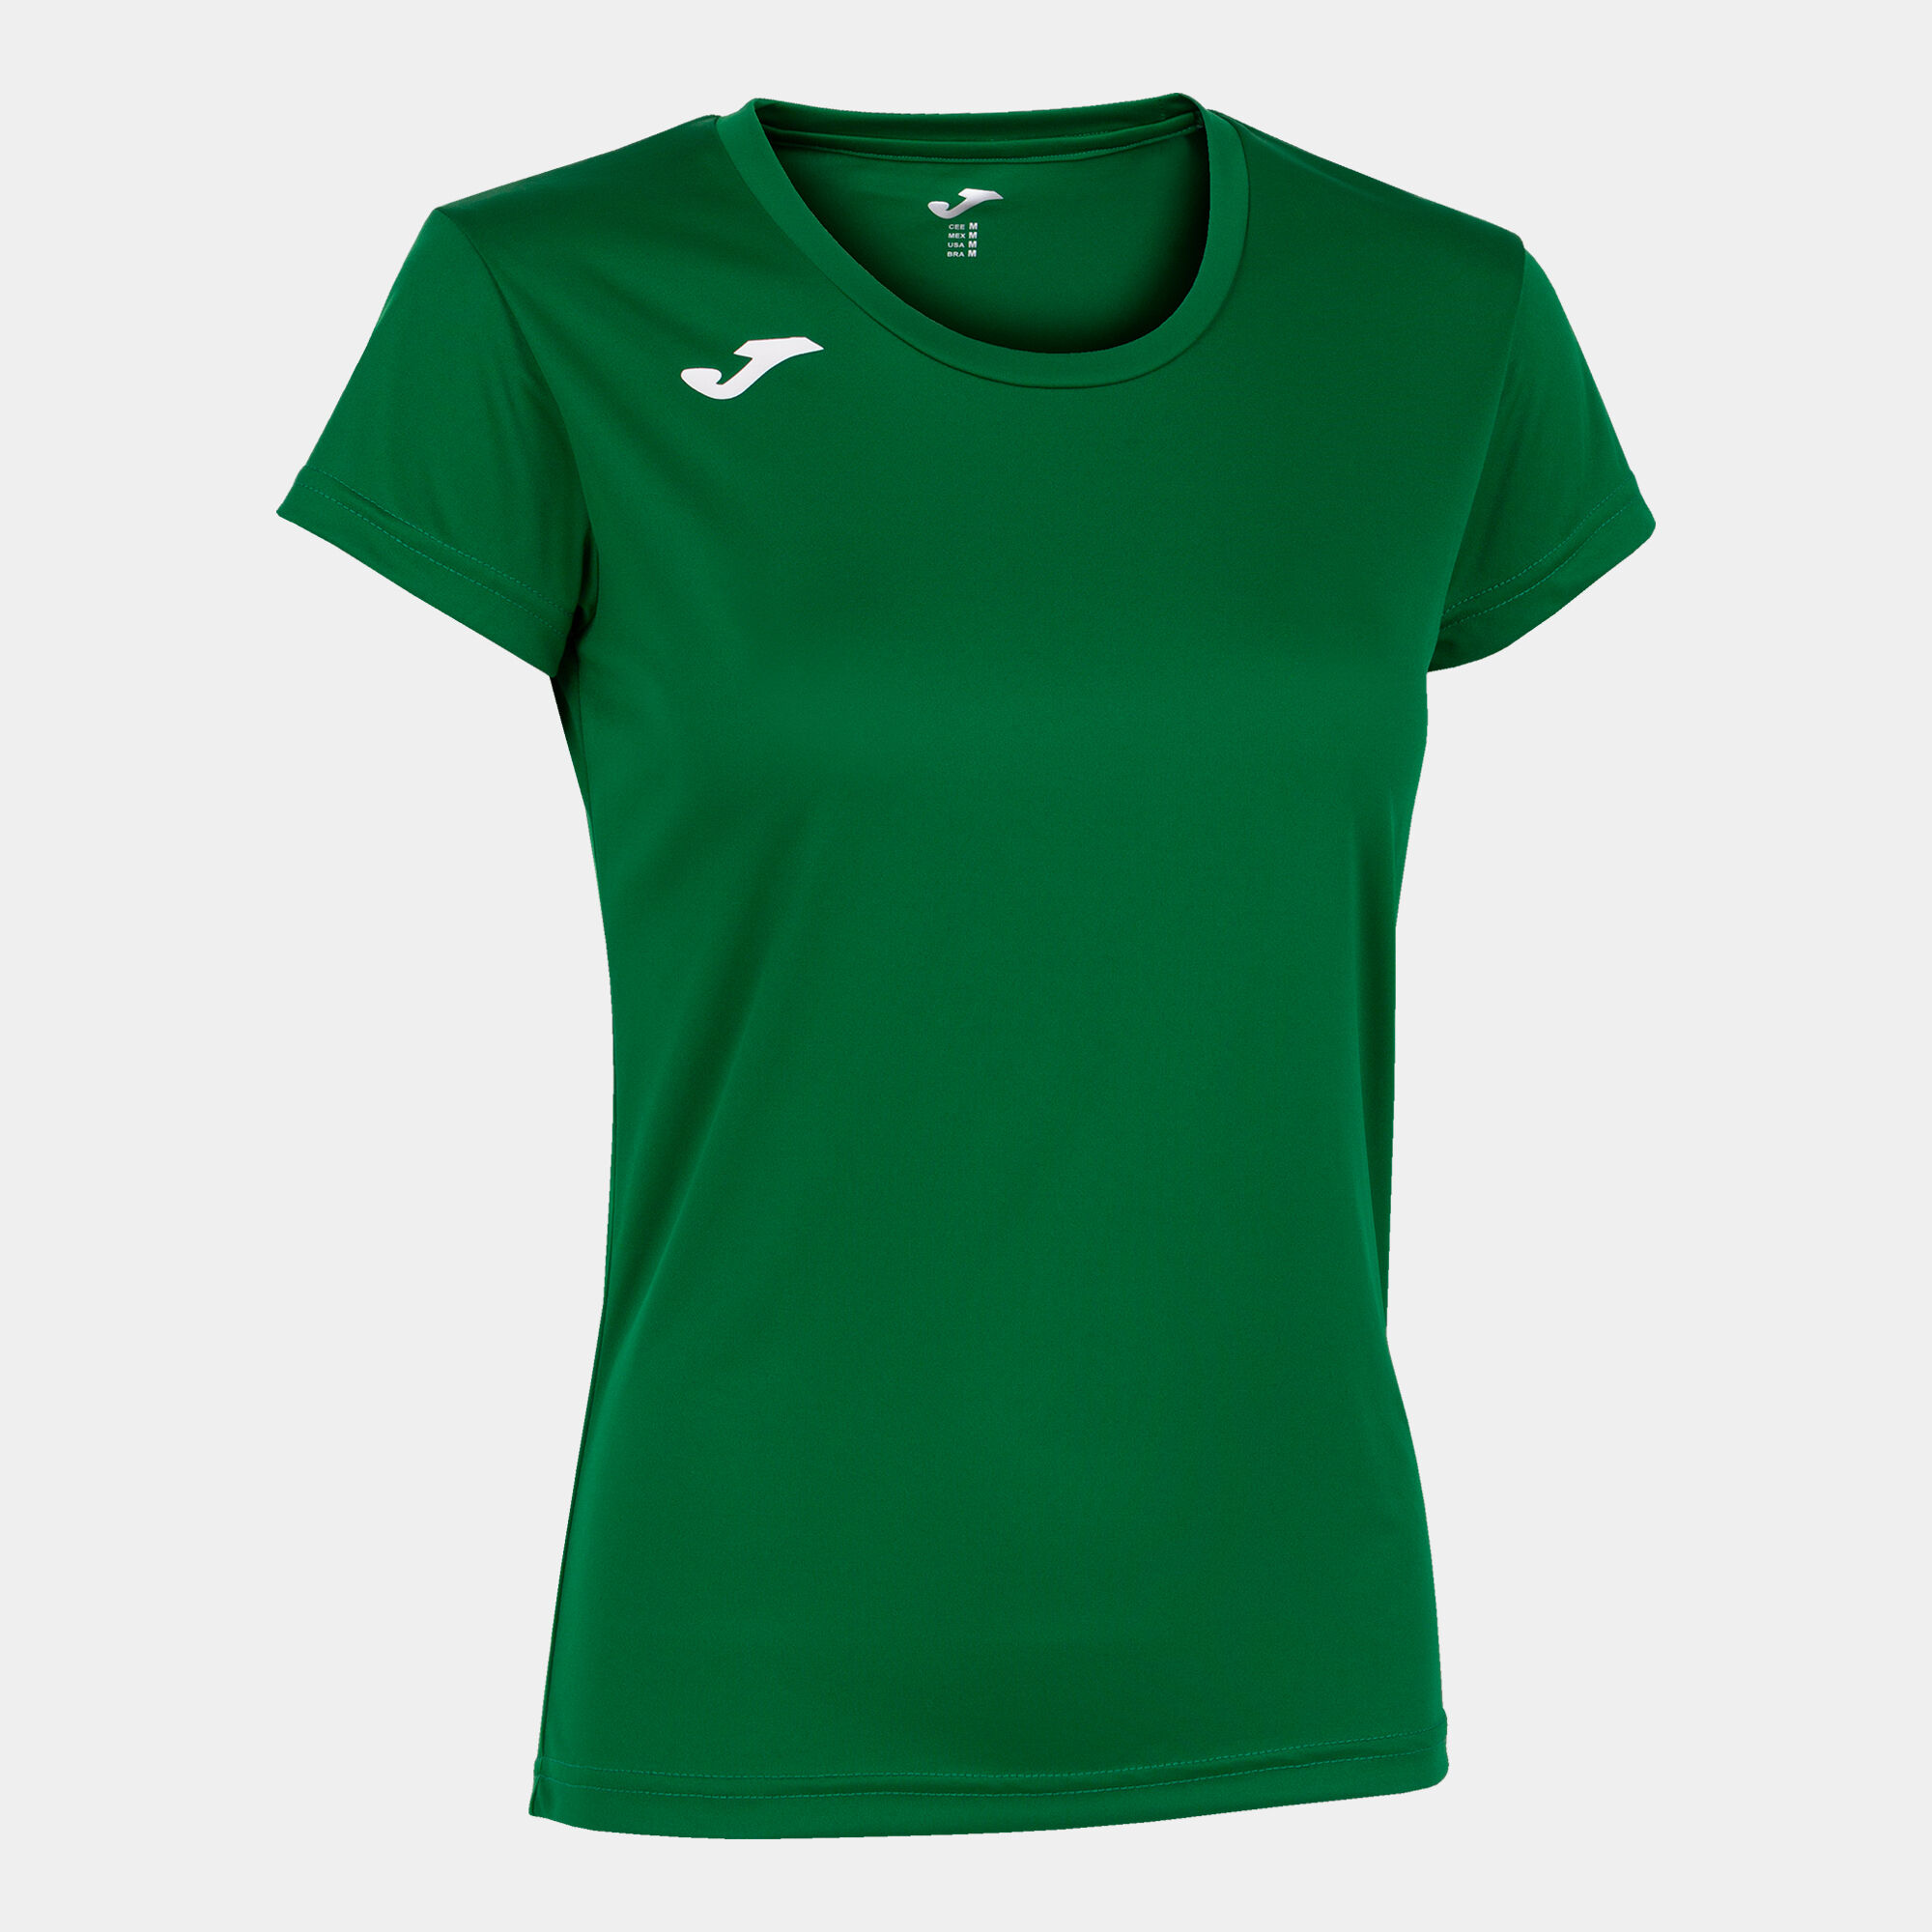 MAILLOT MANCHES COURTES FEMME RECORD II VERT